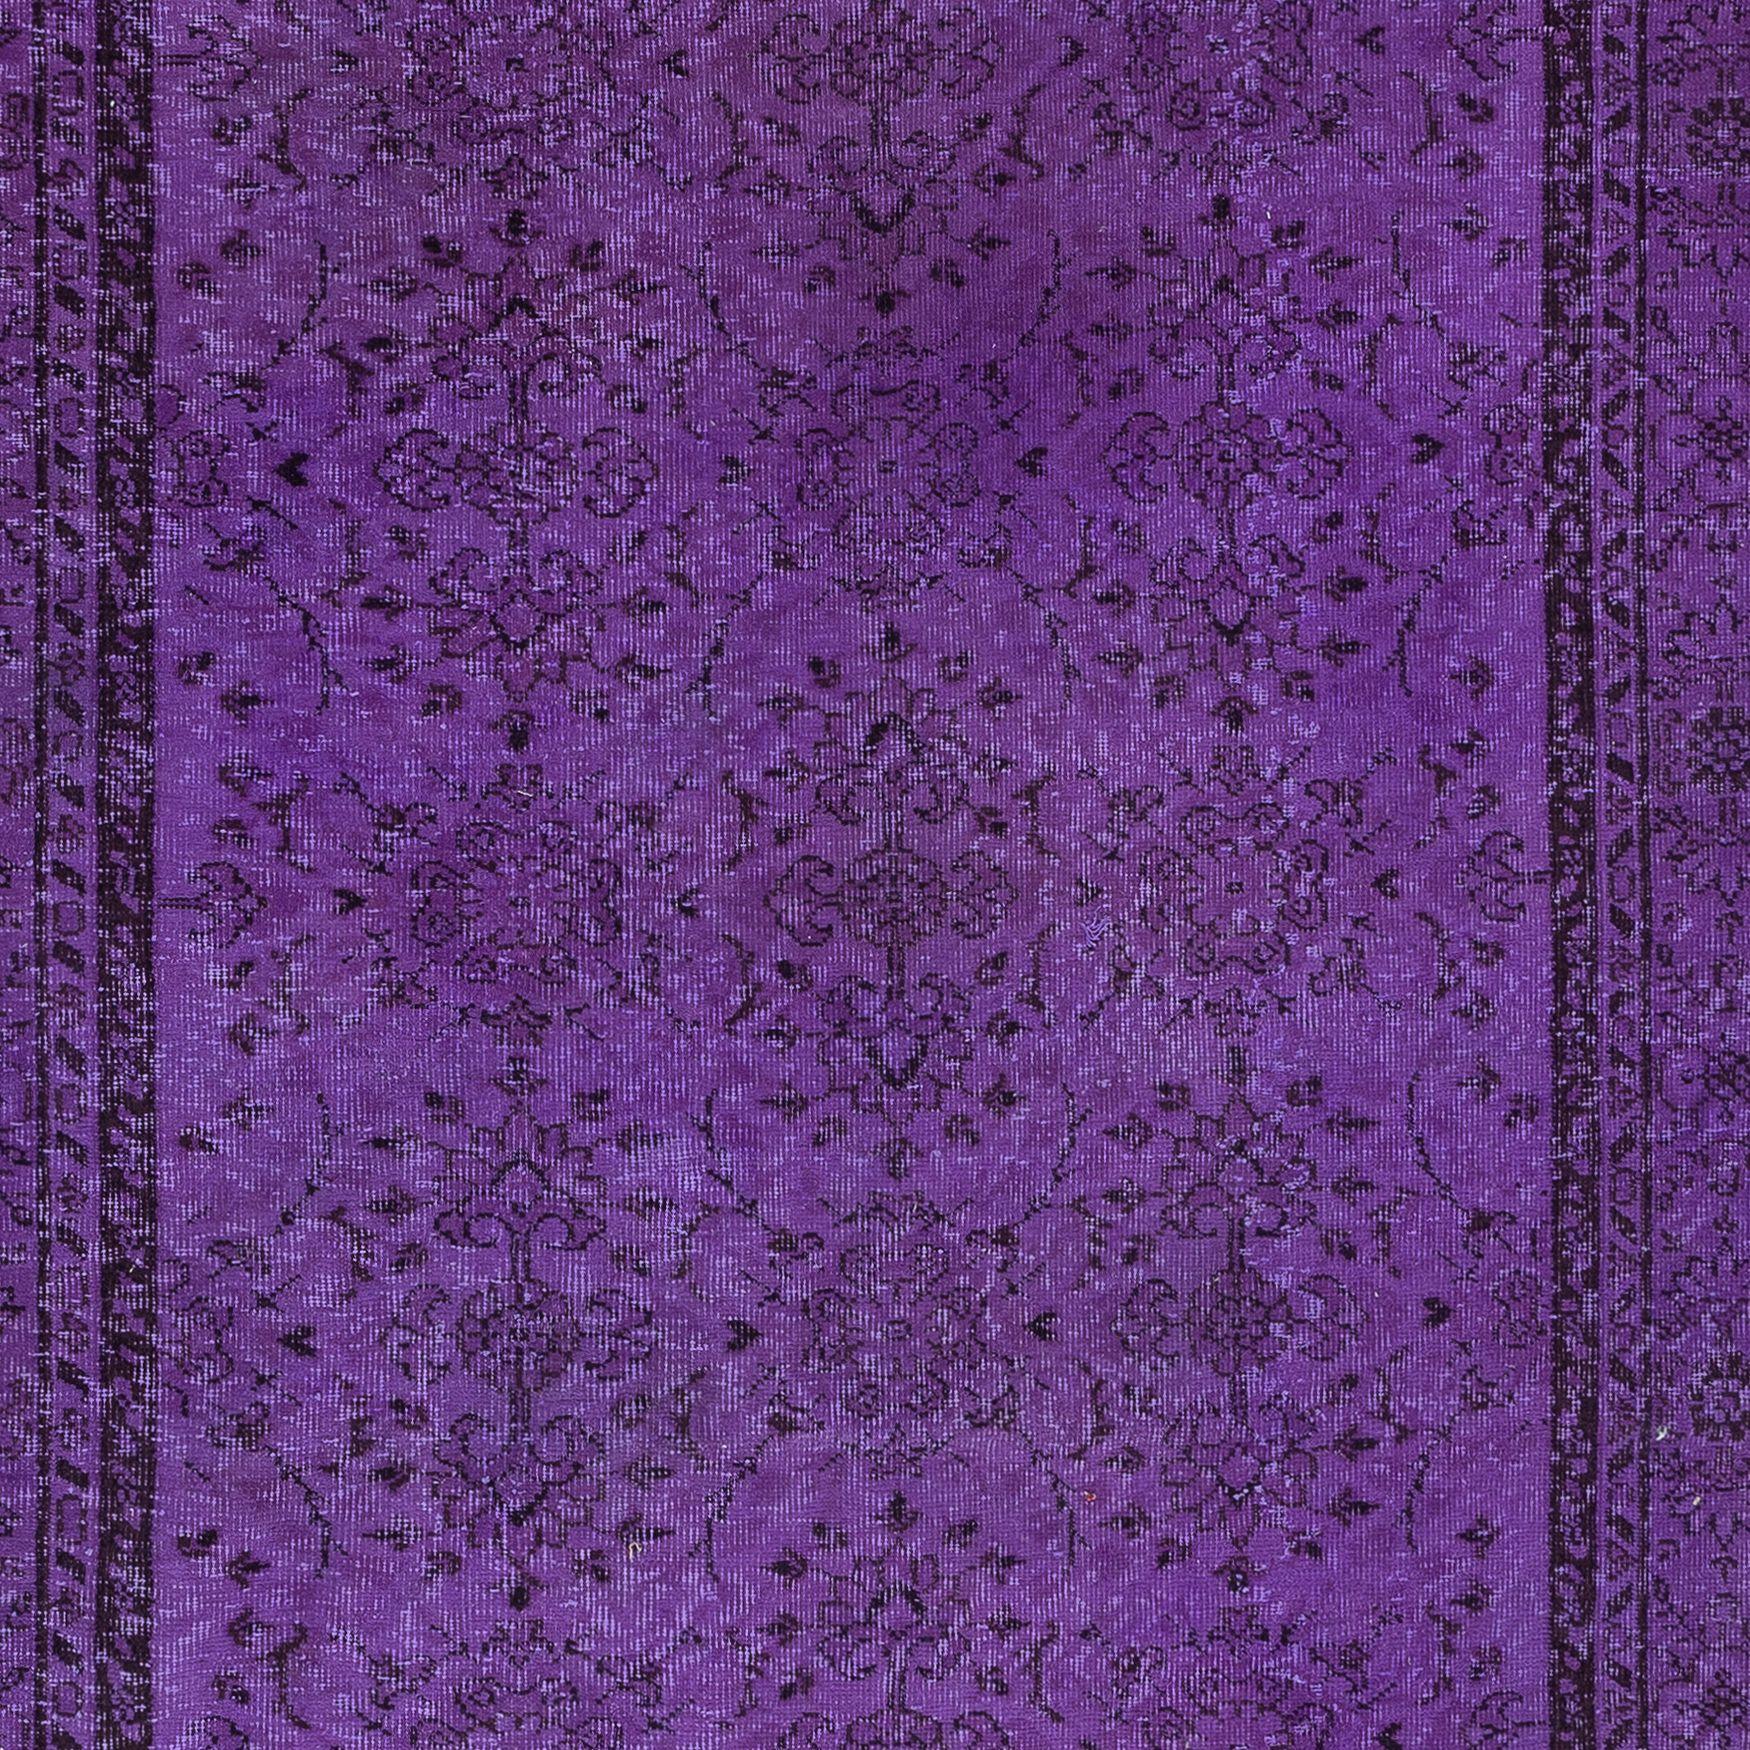 Turkish 5.6x8.6 Ft Modern Hand Knotted Violet Purple Area Rug from Isparta, Turkey For Sale